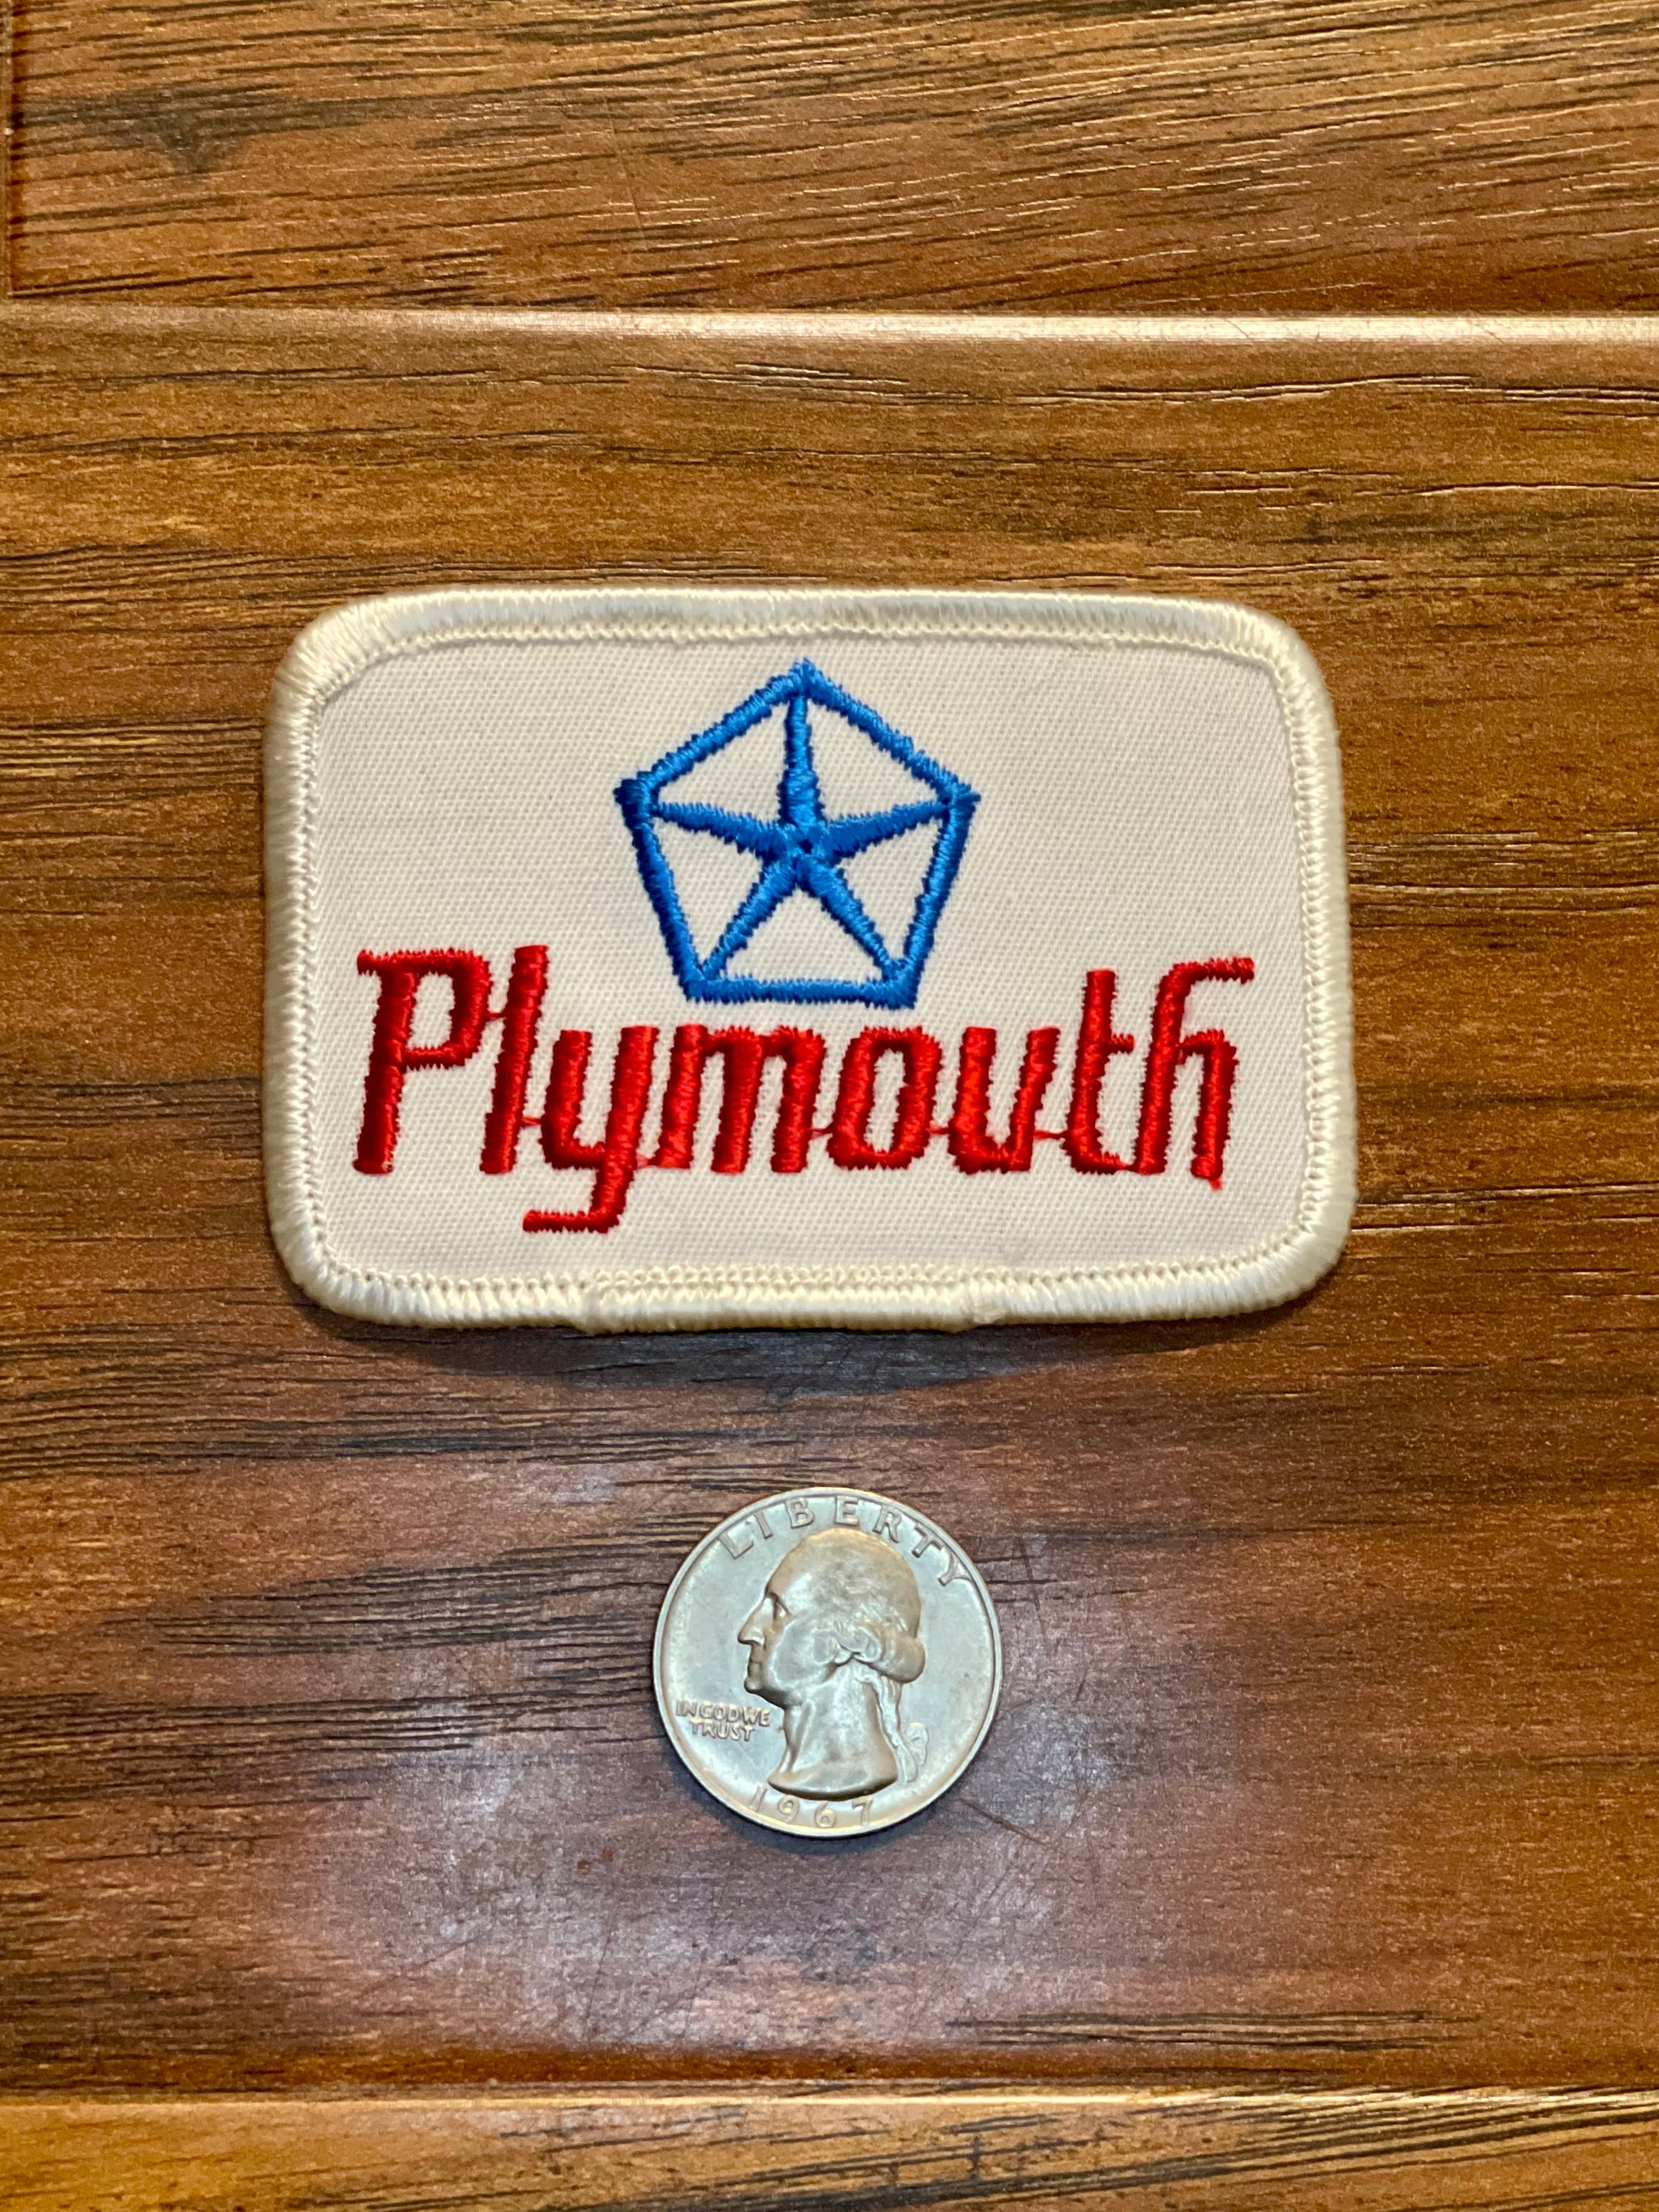 Vintage Plymouth